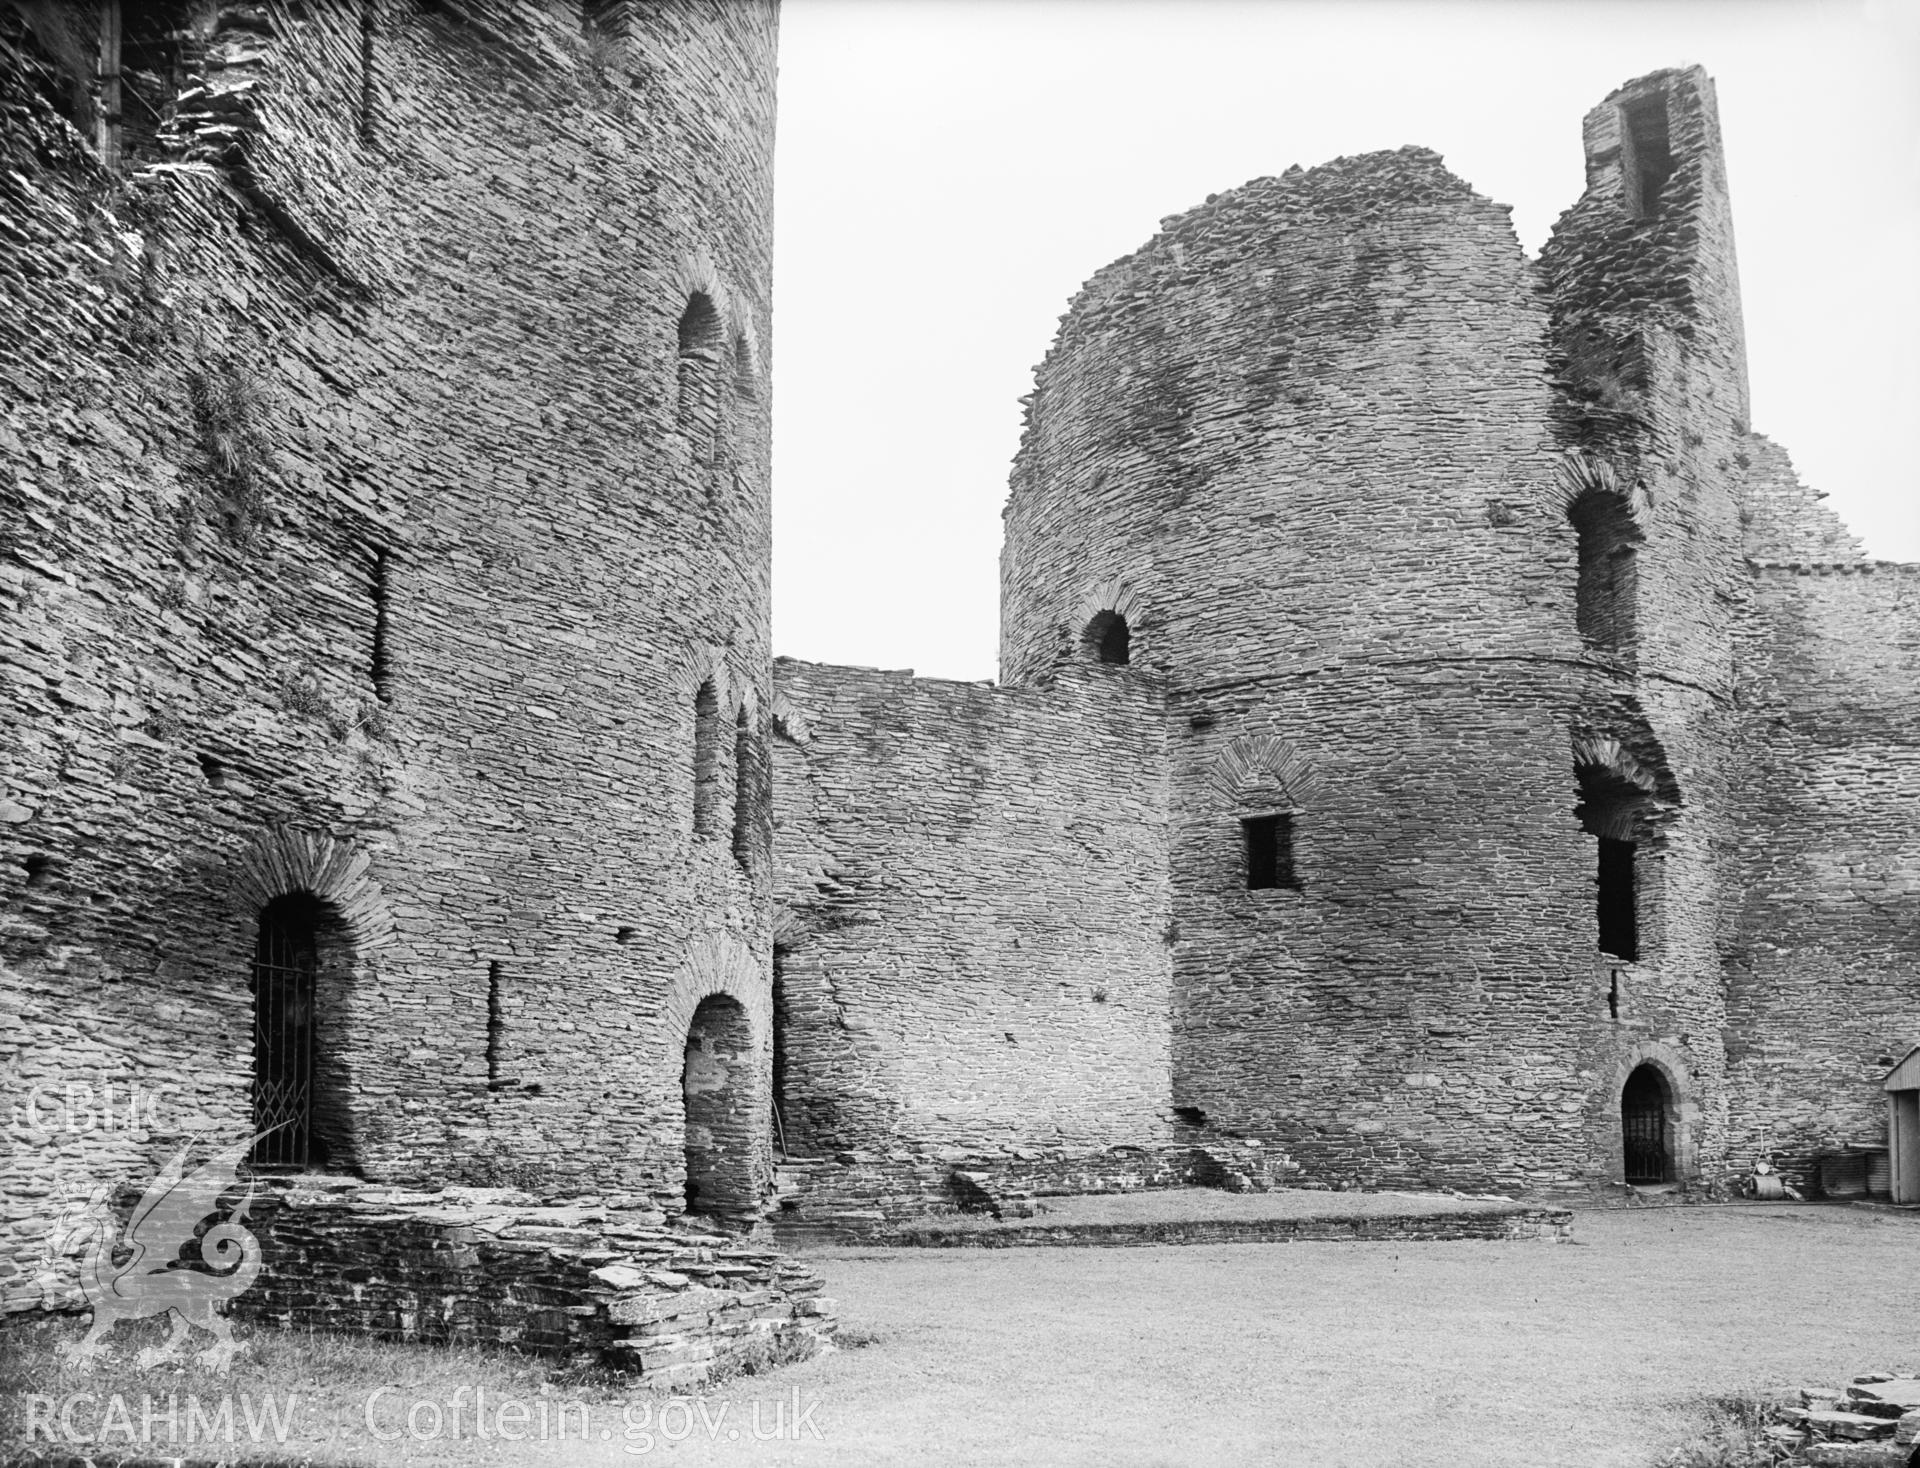 View of the towers from the courtyard looking south-west